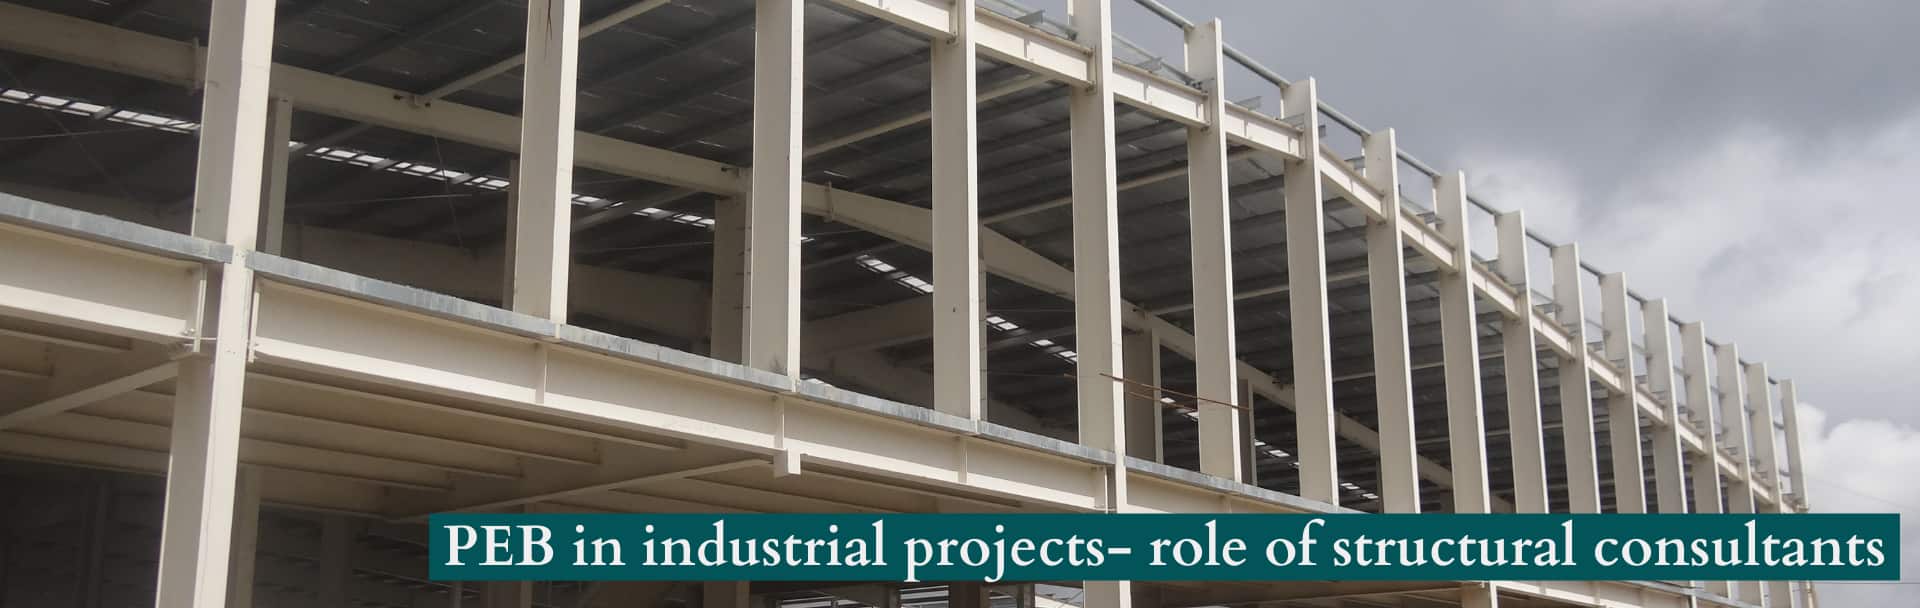 Structural consultants in industrial projects